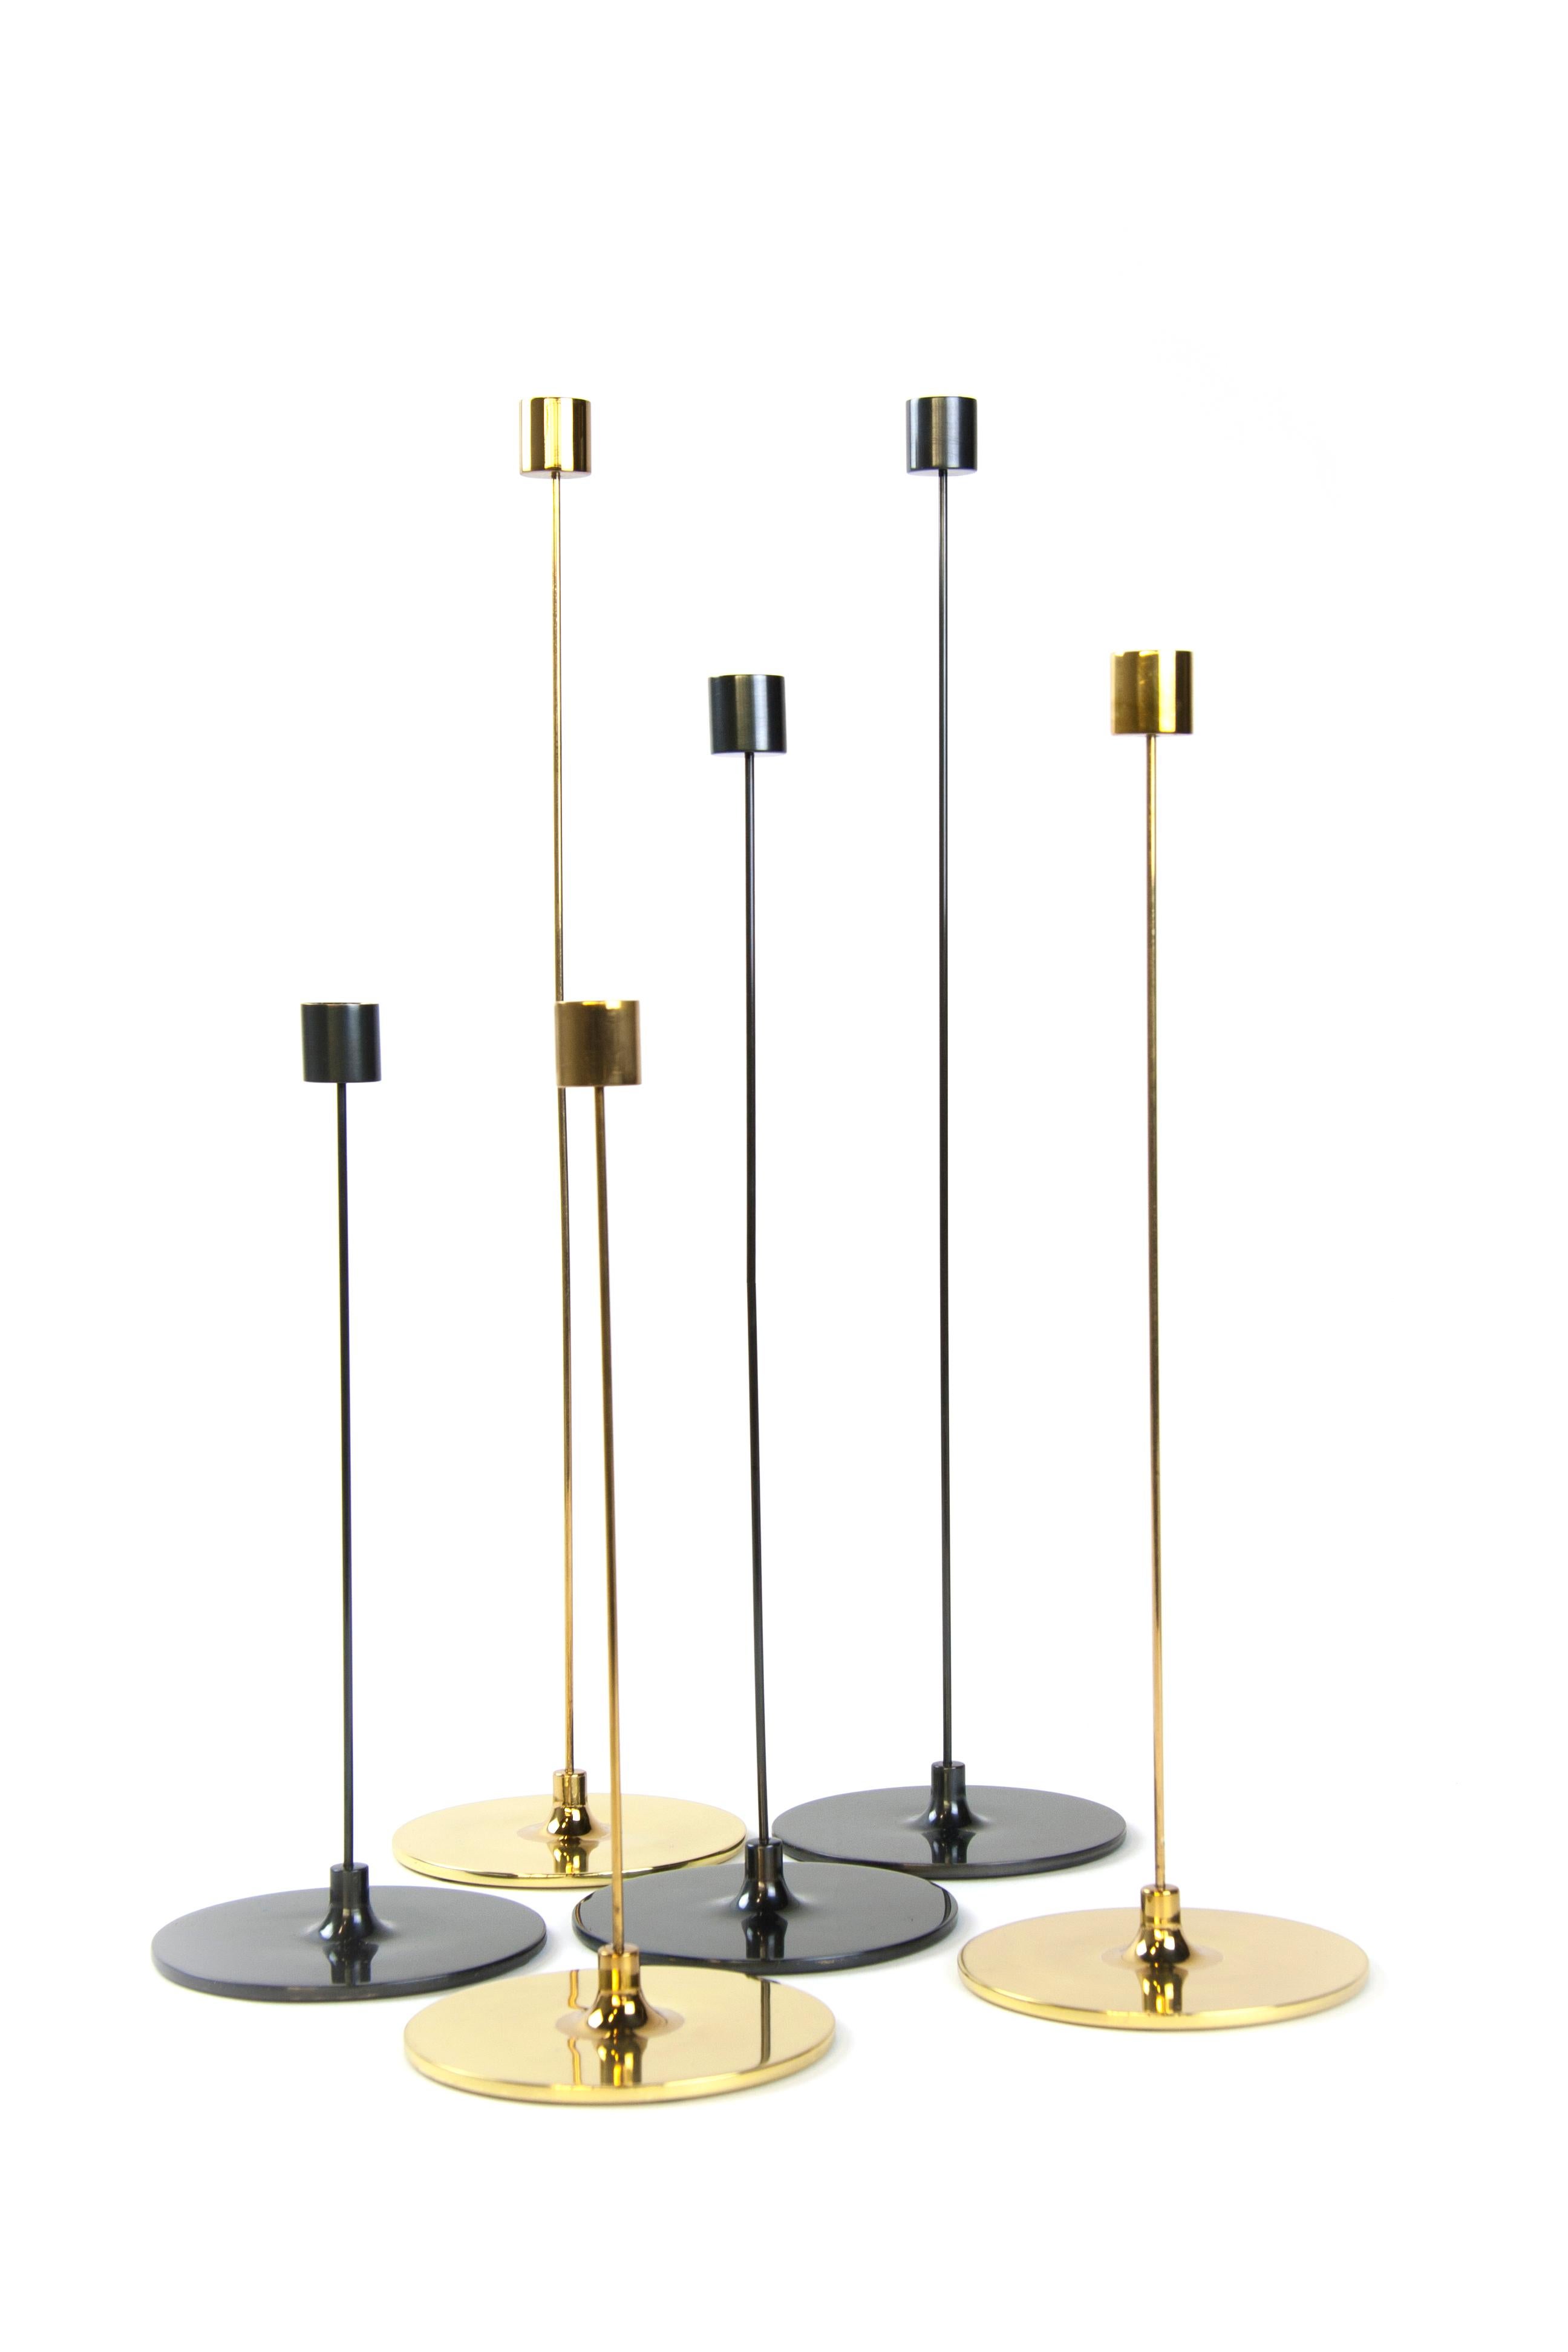 Small Pin brass candlestick by Gentner Design
Dimensions: D 12.7 x H 30.5 cm
Materials: polished tarnished brass
Available in polished tarnished brass and darkened brass.
Available in small, medium and large.

With an 12”, 16”, or 20” height, the